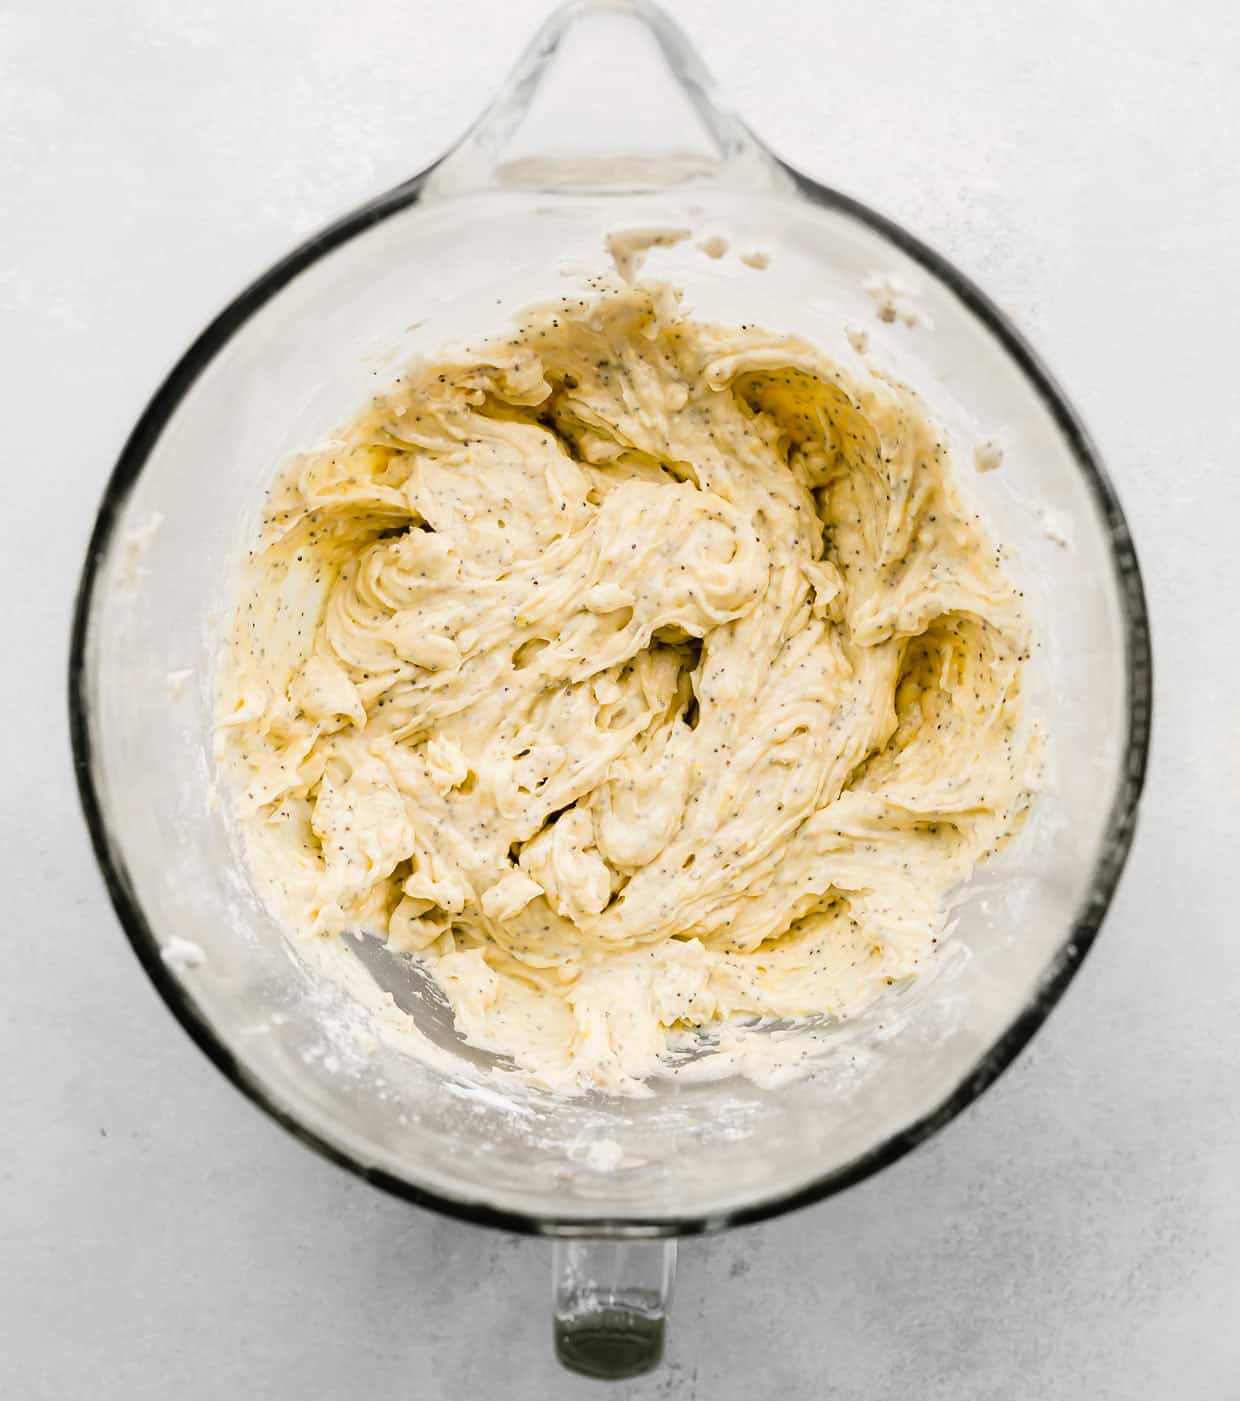 Lemon Poppy Seed Muffin batter in a glass mixing bowl on a white background.